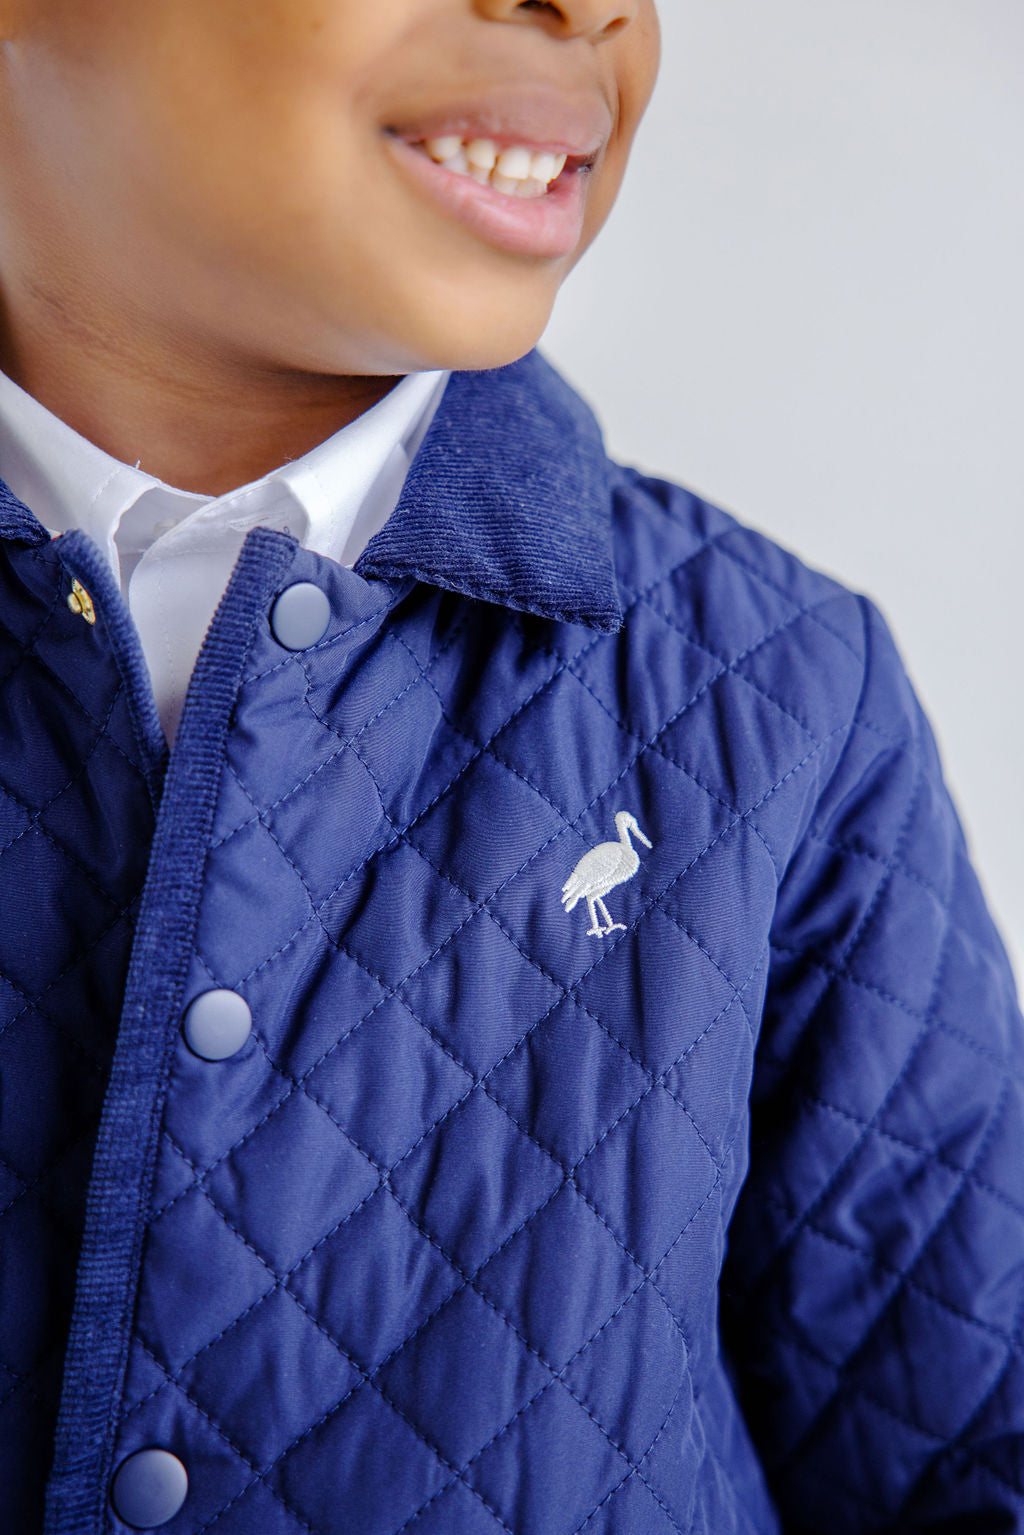 Caldwell Quilted Coat - Nantucket Navy